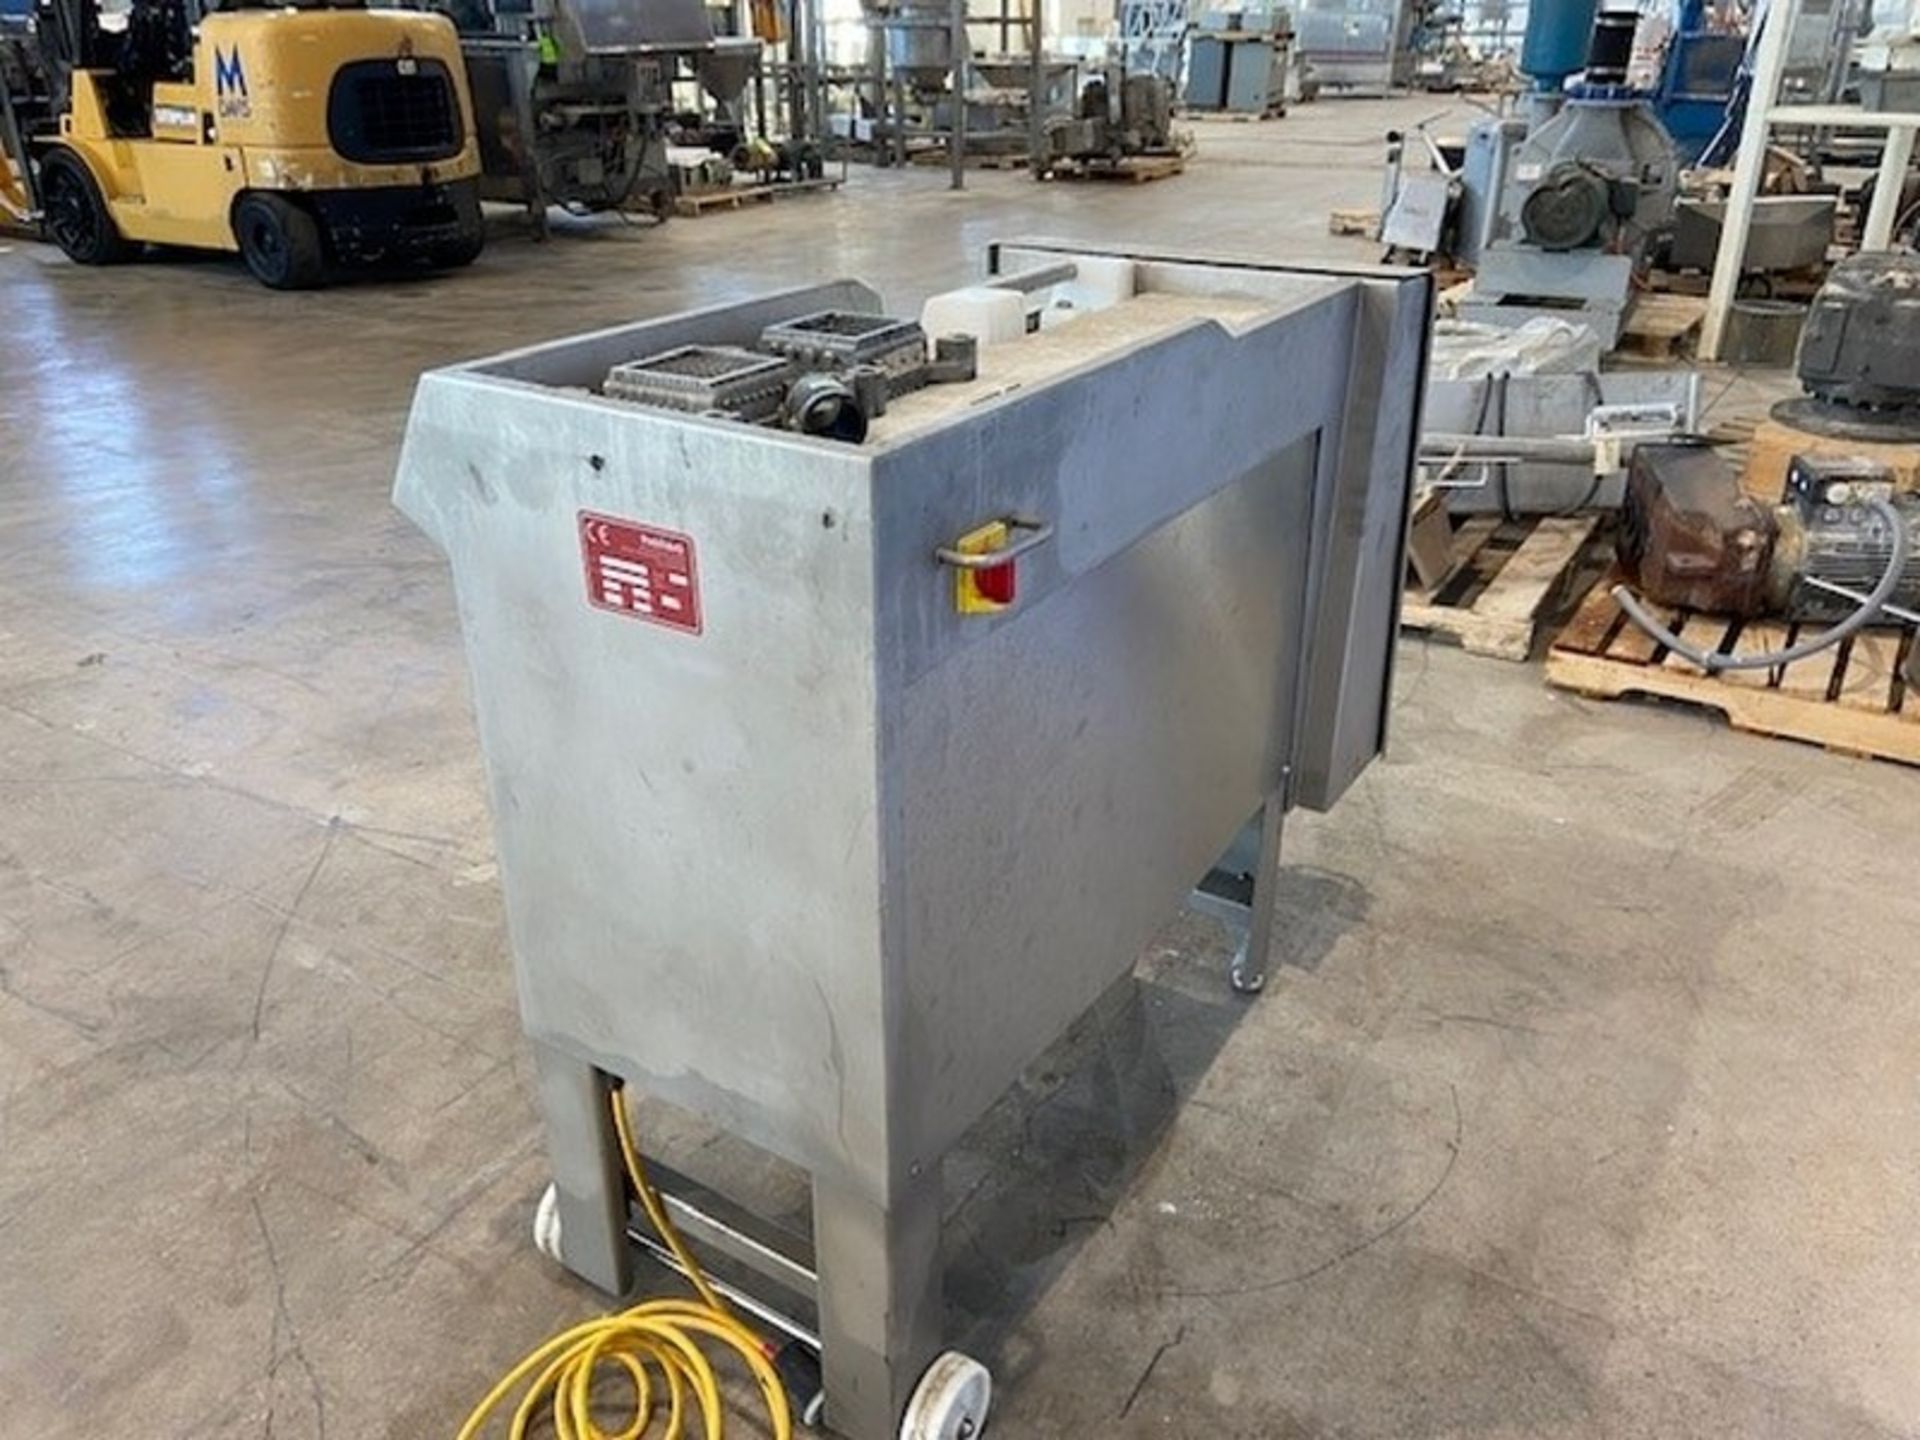 2013 Holac The Rounder, Type CUBIXX 100 L, S/N 003-48-41, 220 Volts, 3 Phase, with (2) Cutting - Image 7 of 8